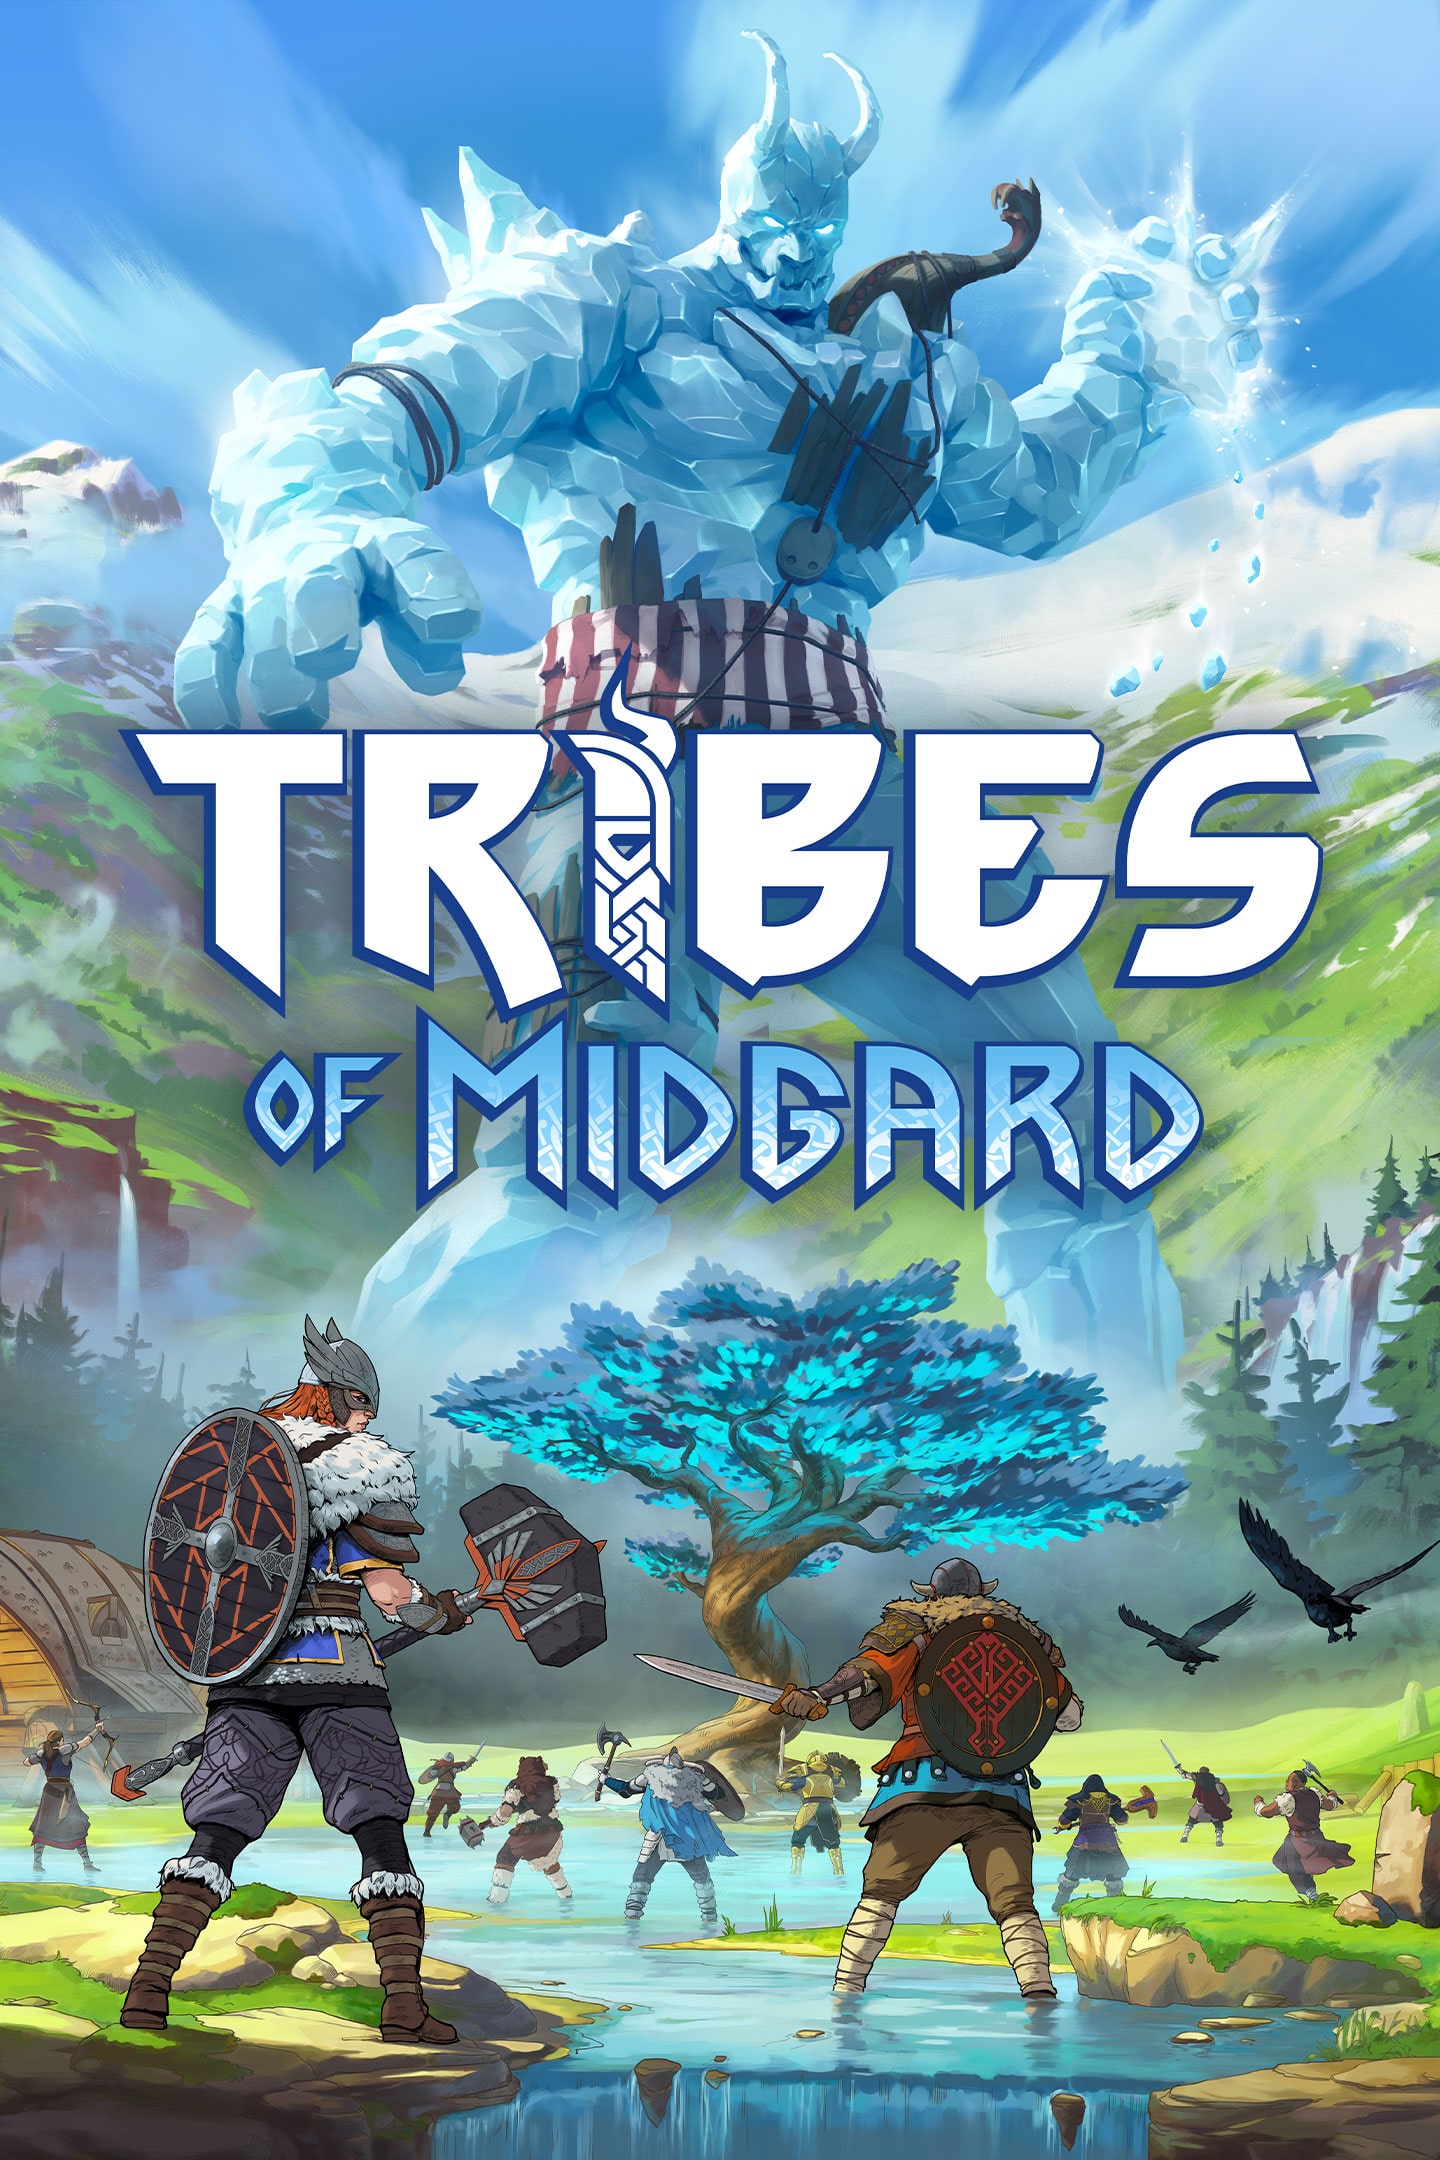 Tribes of Midgard update 1.03 live on PS5, PS4, and PC